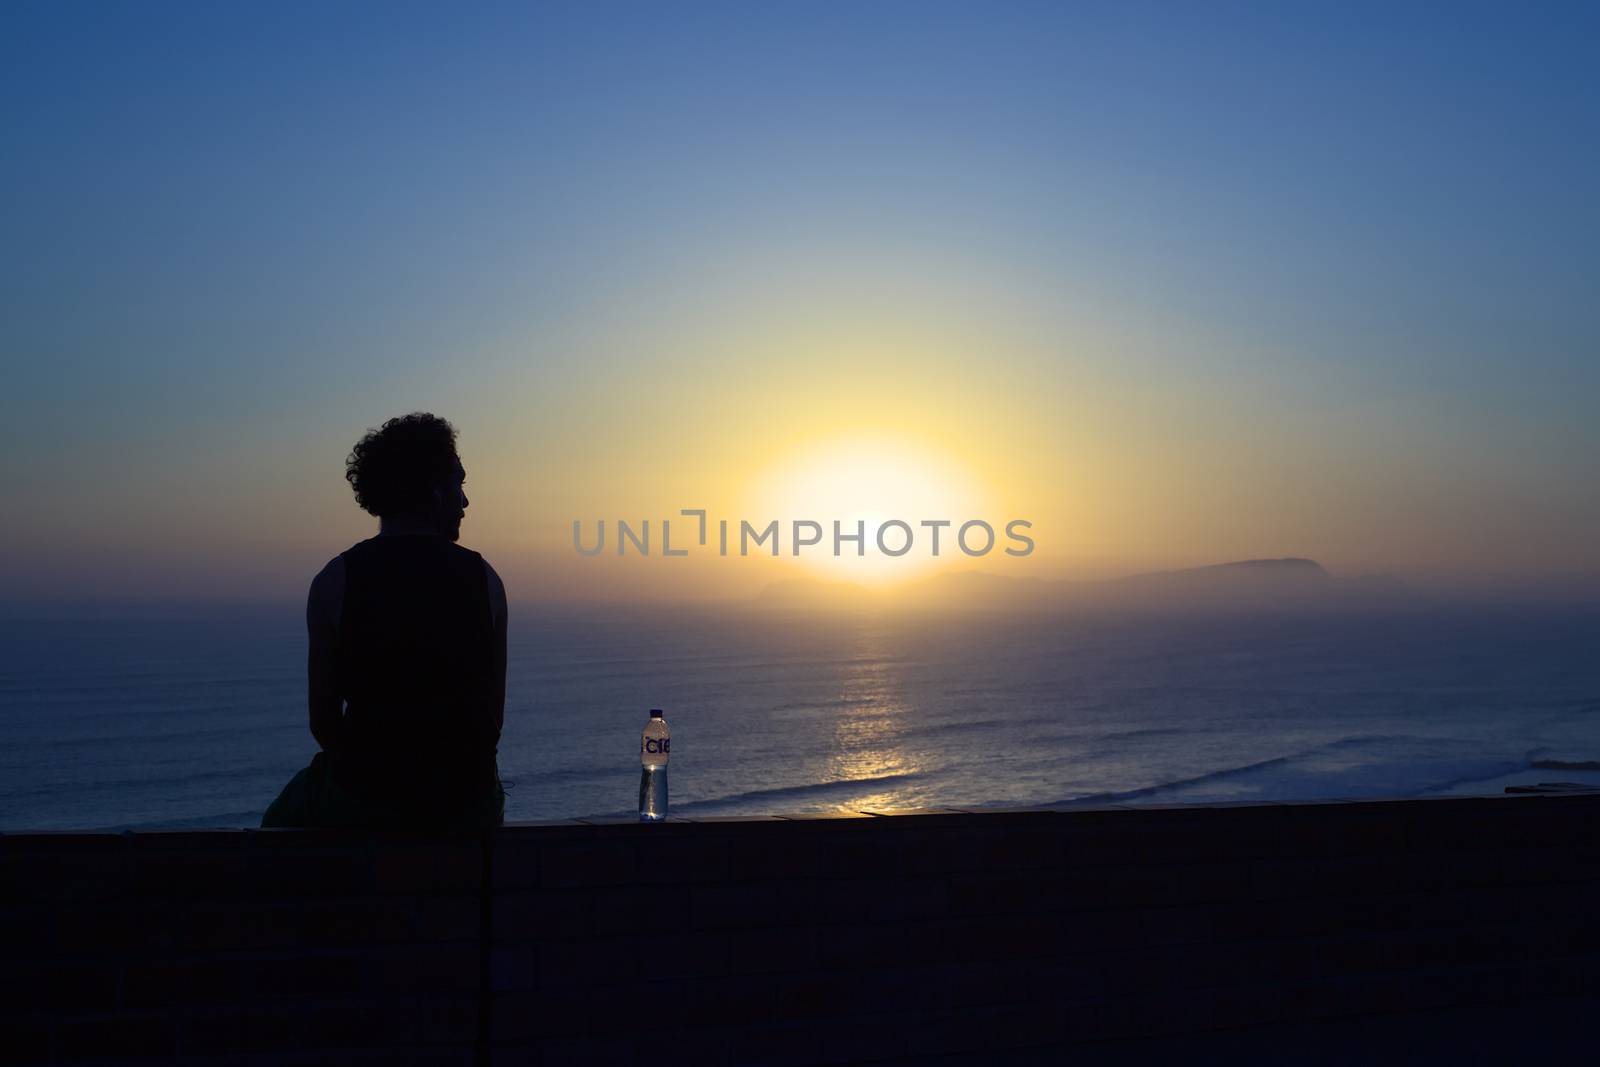 LIMA, PERU - MARCH 30, 2012: Unidentified young man watching the sun setting over the island San Lorenzo in the Pacific Ocean on March 30, 2012 in Miraflores, Lima, Peru.